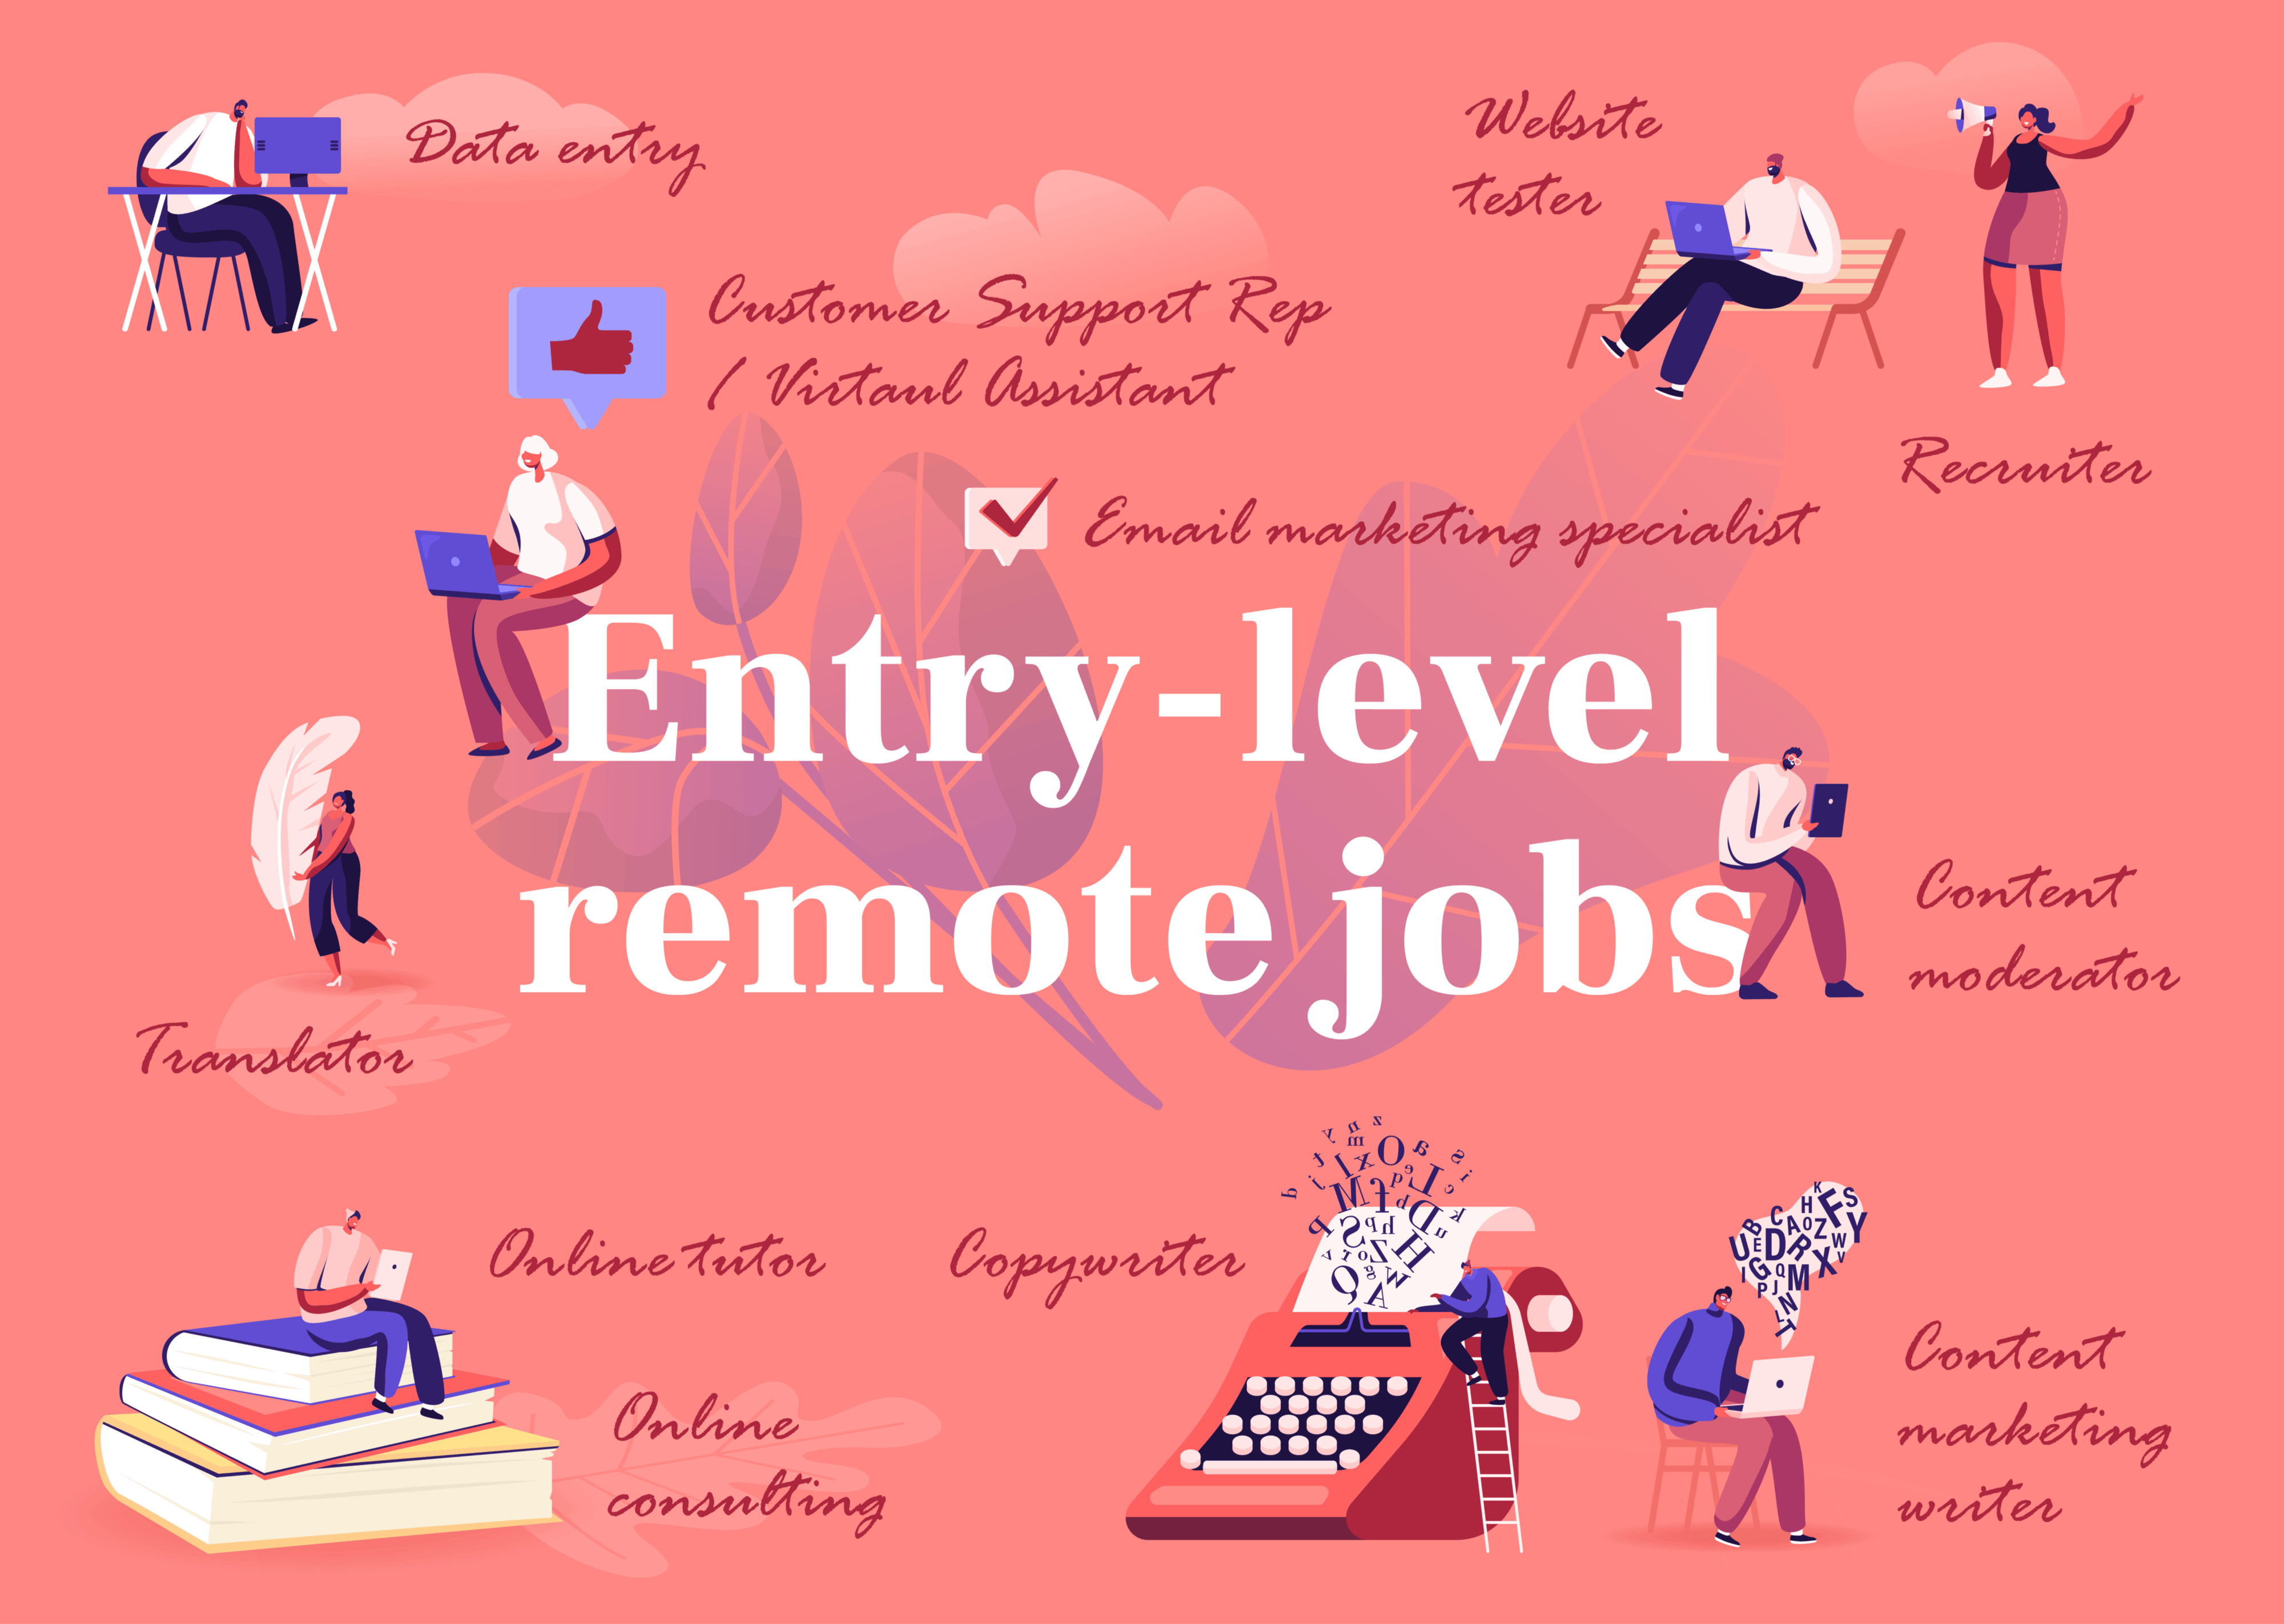 Where can I find entry-level remote jobs